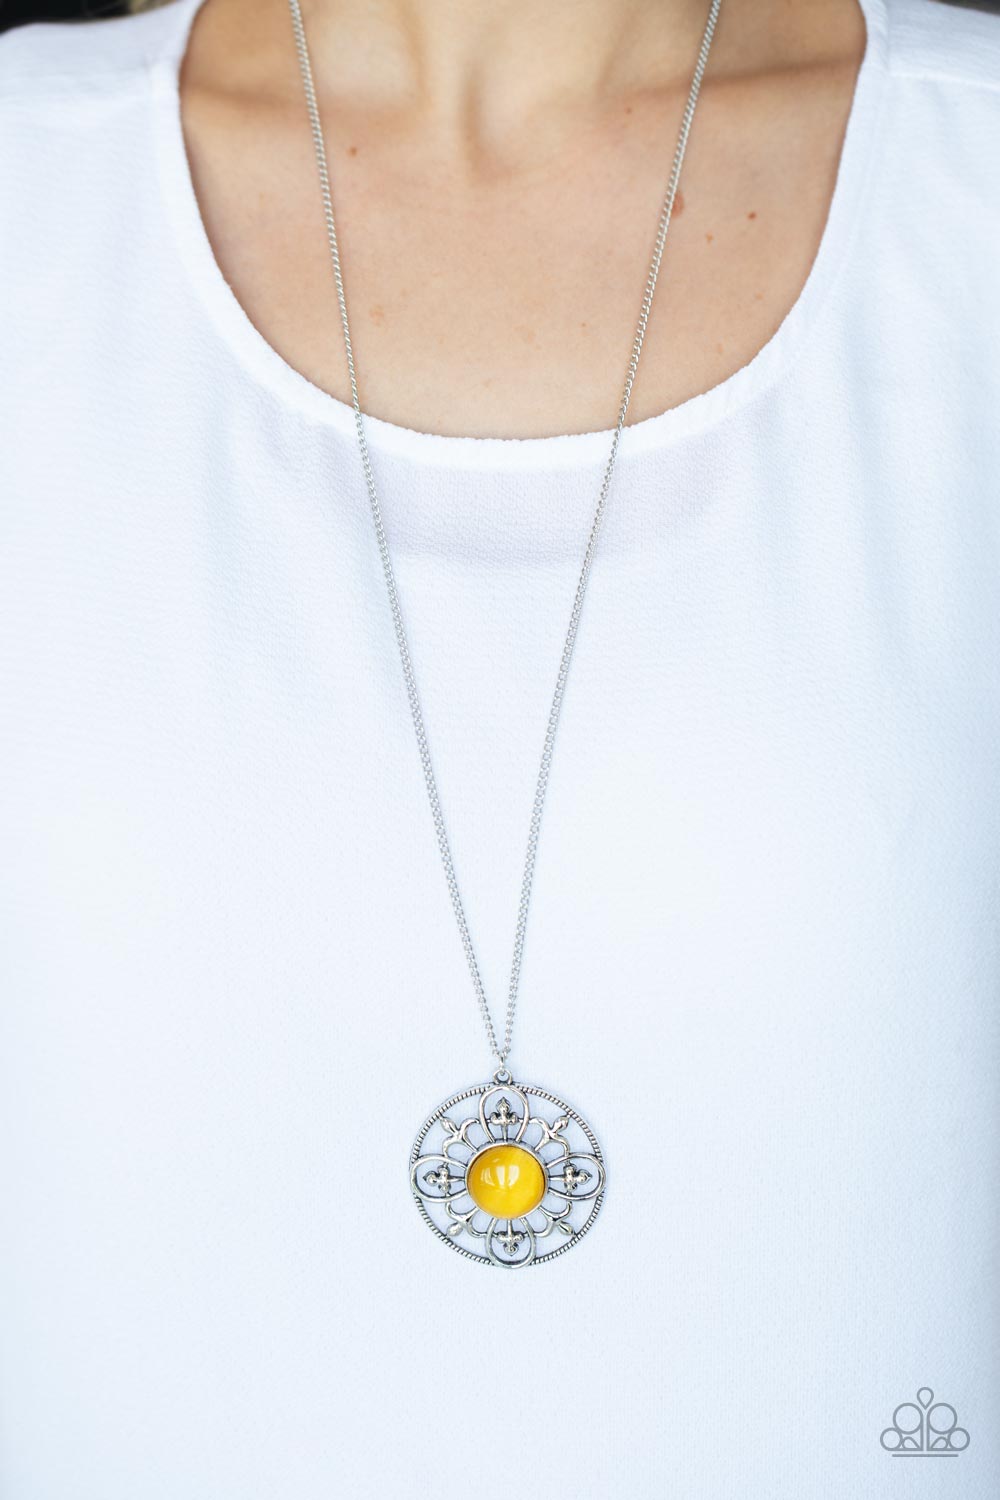 Celestial Compass Yellow Cat's Eye Stone Necklace - Paparazzi Accessories- lightbox - CarasShop.com - $5 Jewelry by Cara Jewels